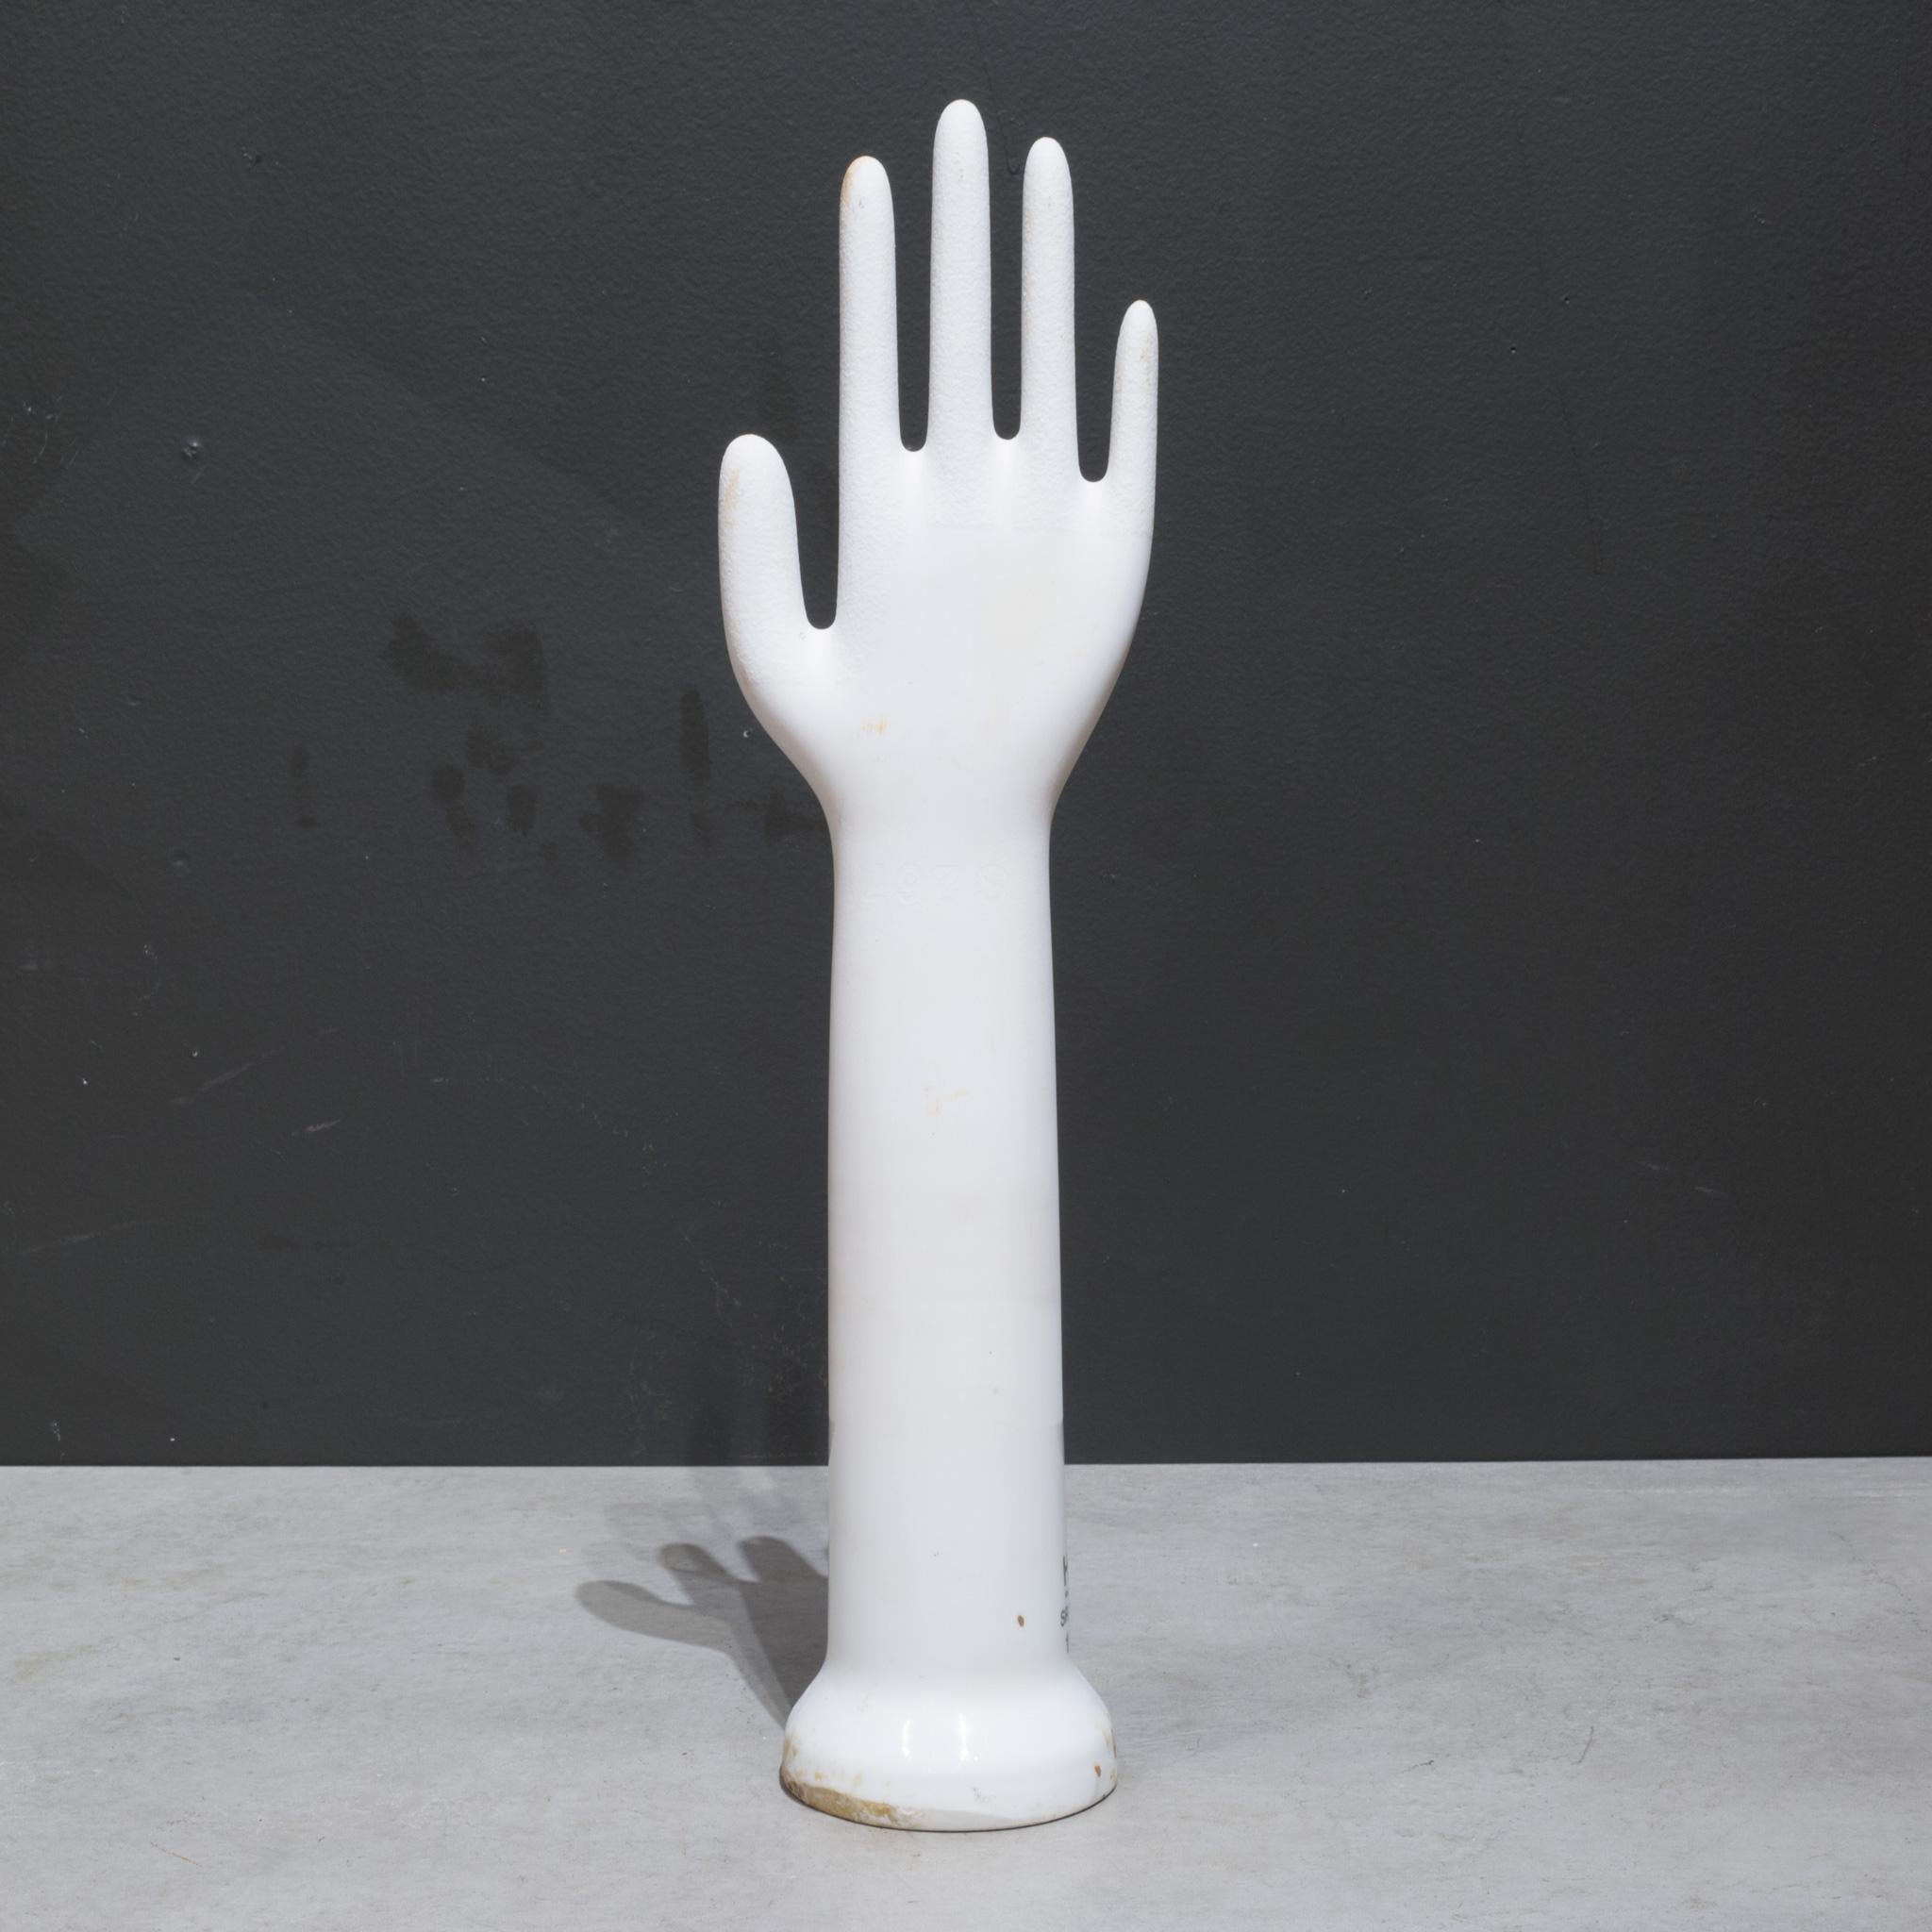 20th Century West German Glazed Porcelain Factory Rubber Glove Molds c.1987  (FREE SHIPPING) For Sale